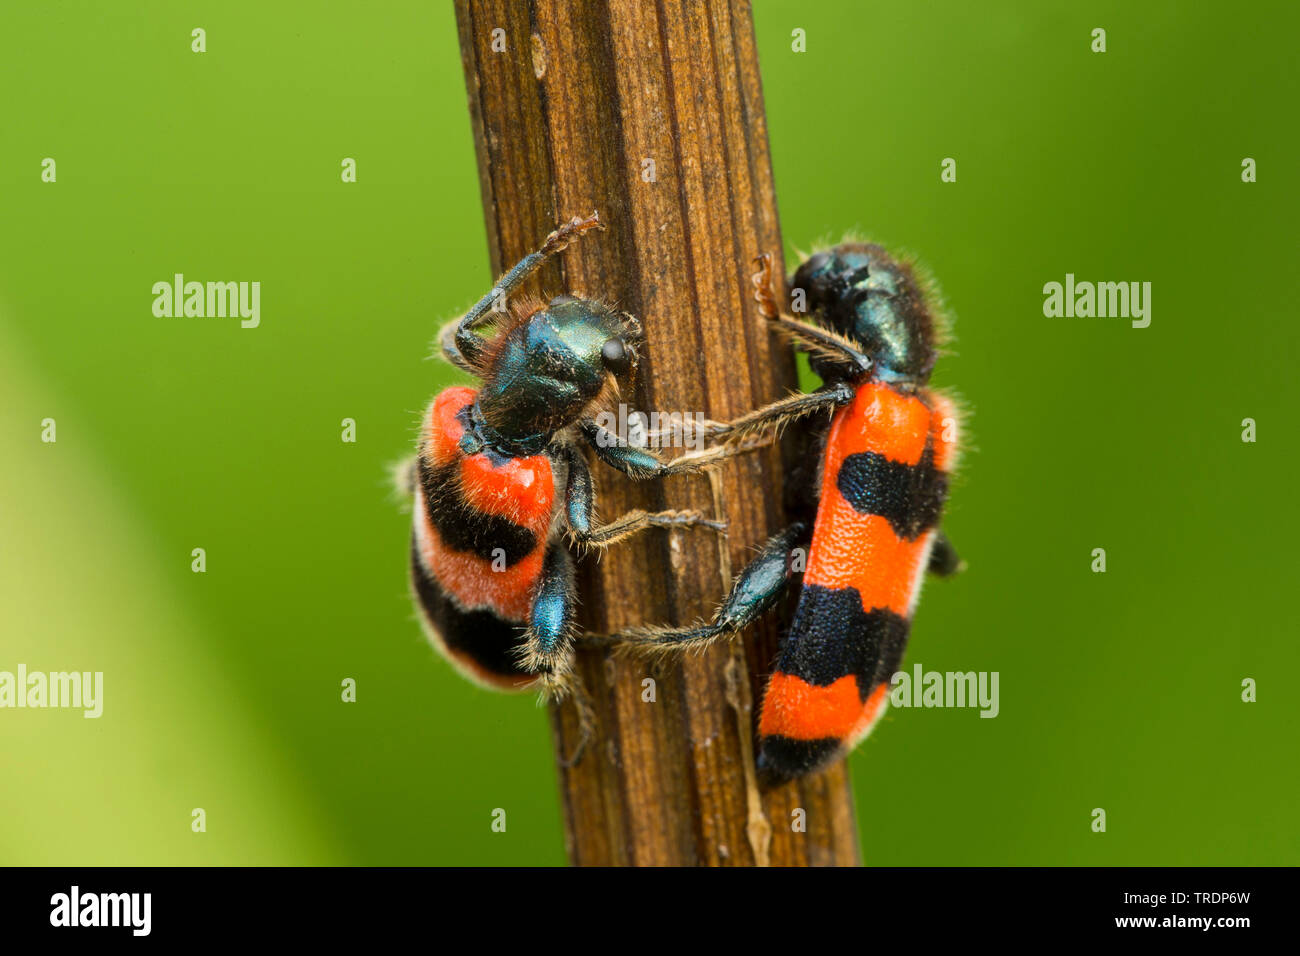 Bee hive beetle (Trichodes apiarius), on a stalk, Hungary Stock Photo